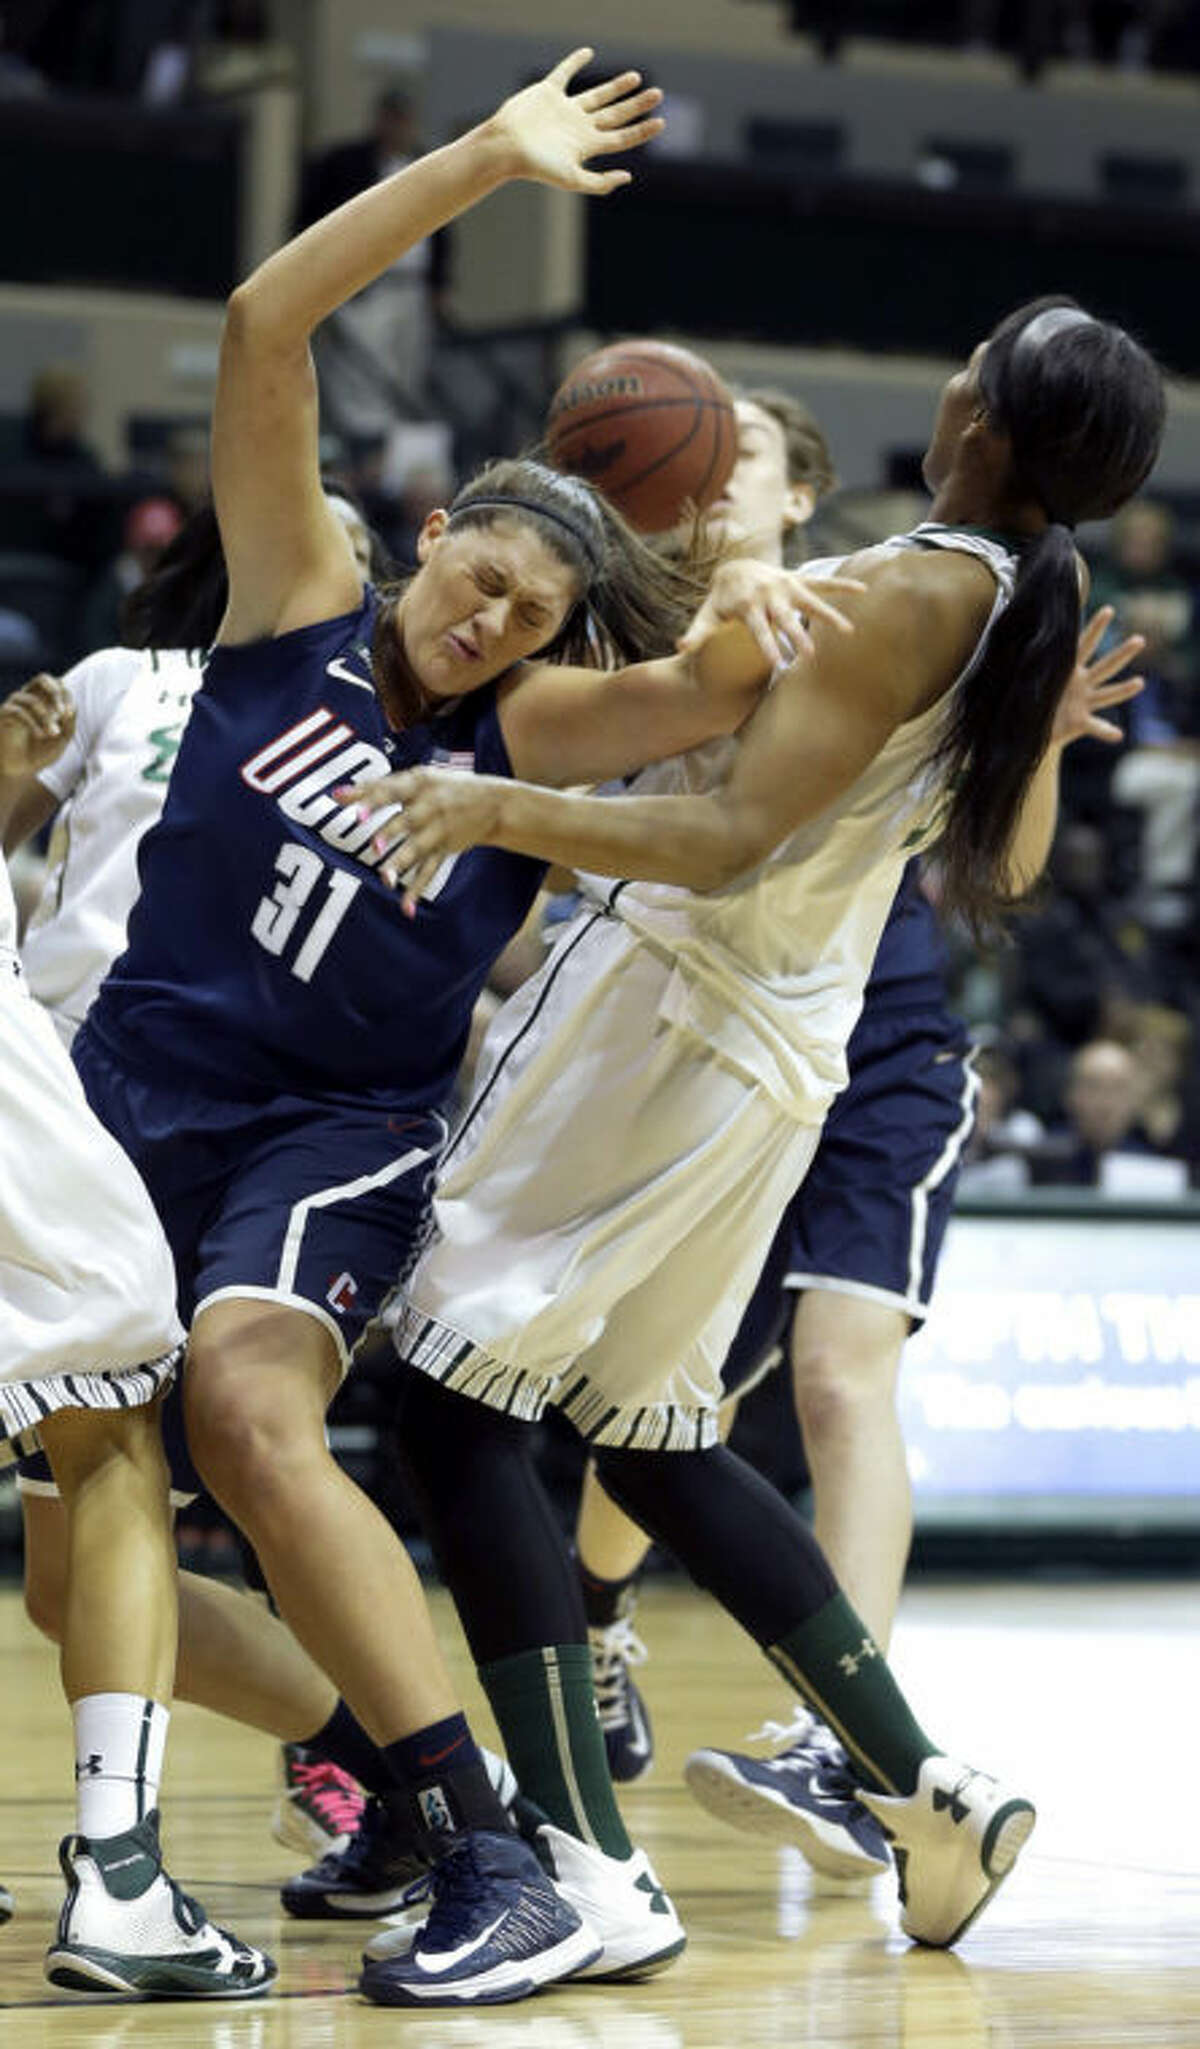 Connecticut center Stefanie Dolson (31) gets fouled by South Florida center Akila McDonald (32) during the first half of an NCAA college basketball game Saturday, March 2, 2013, in Tampa, Fla. (AP Photo/Chris O'Meara)